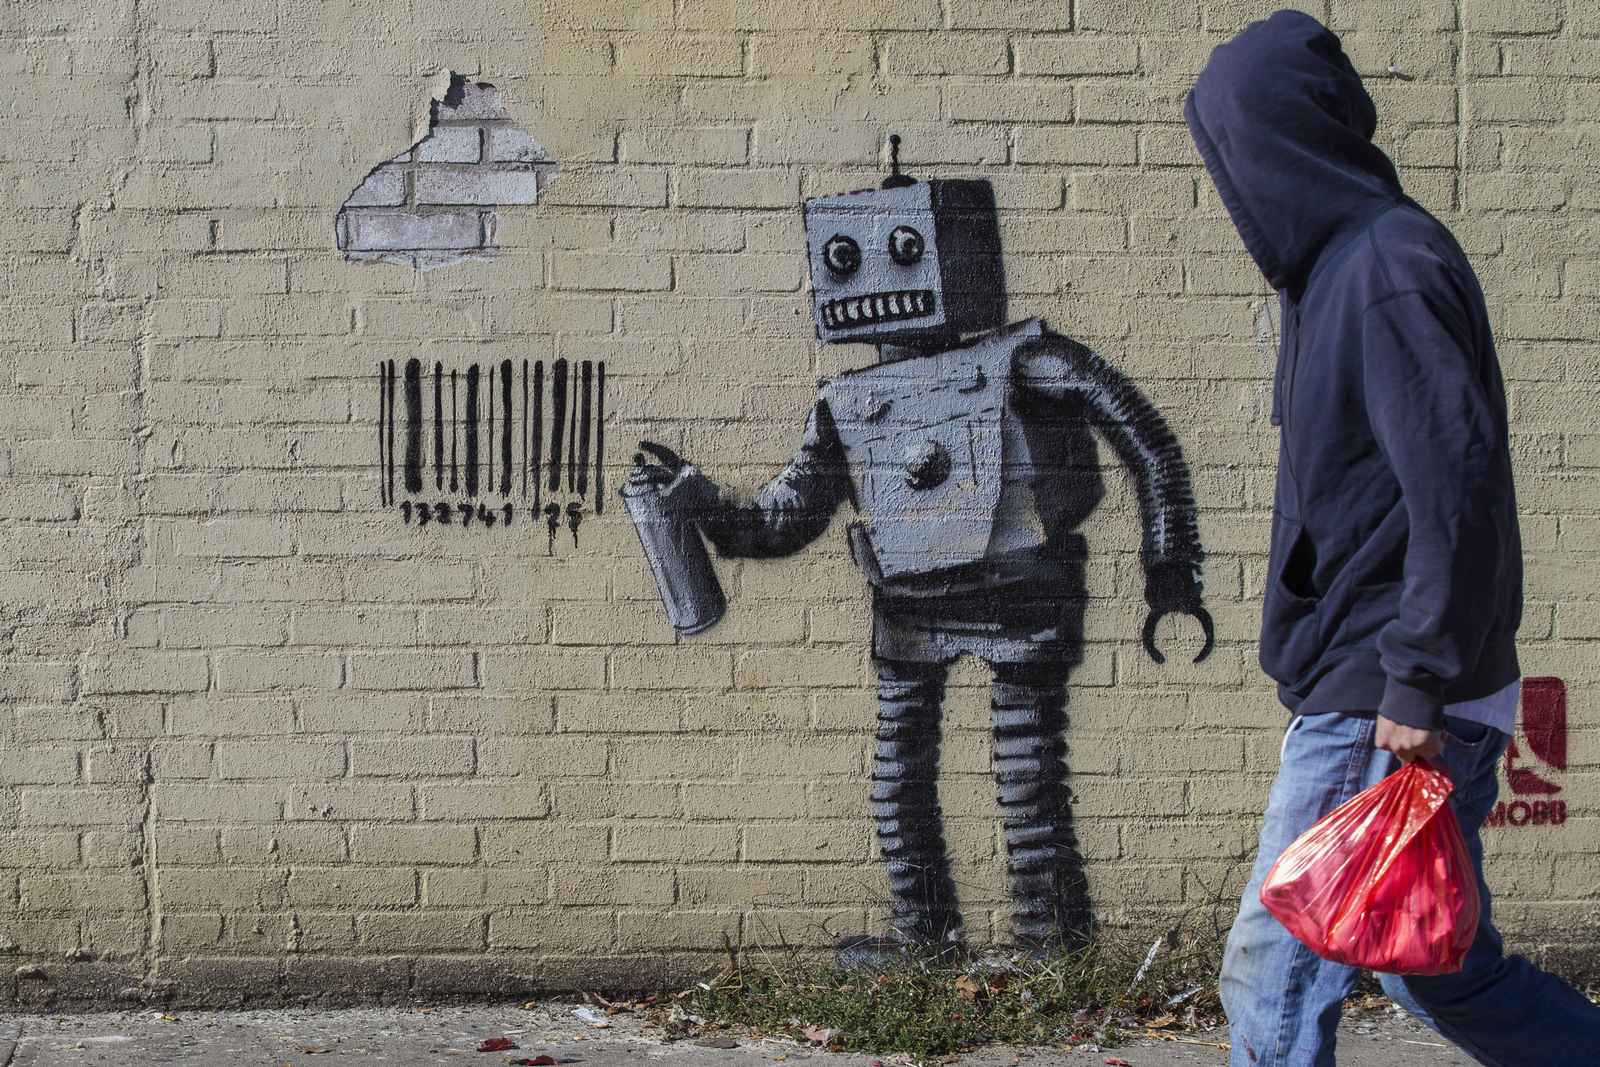 The newest art installation by British artist Banksy, a robot and a barcode, is seen on a wall in the Coney Island area of New York City, October 28, 2013. Famously jaded New Yorkers are getting swept up in the hype over Banksy, the renegade graffiti artist who is leaving his mark across the city this month.   REUTERS/Brendan McDermid (UNITED STATES - Tags: SOCIETY) - RTX14RU3